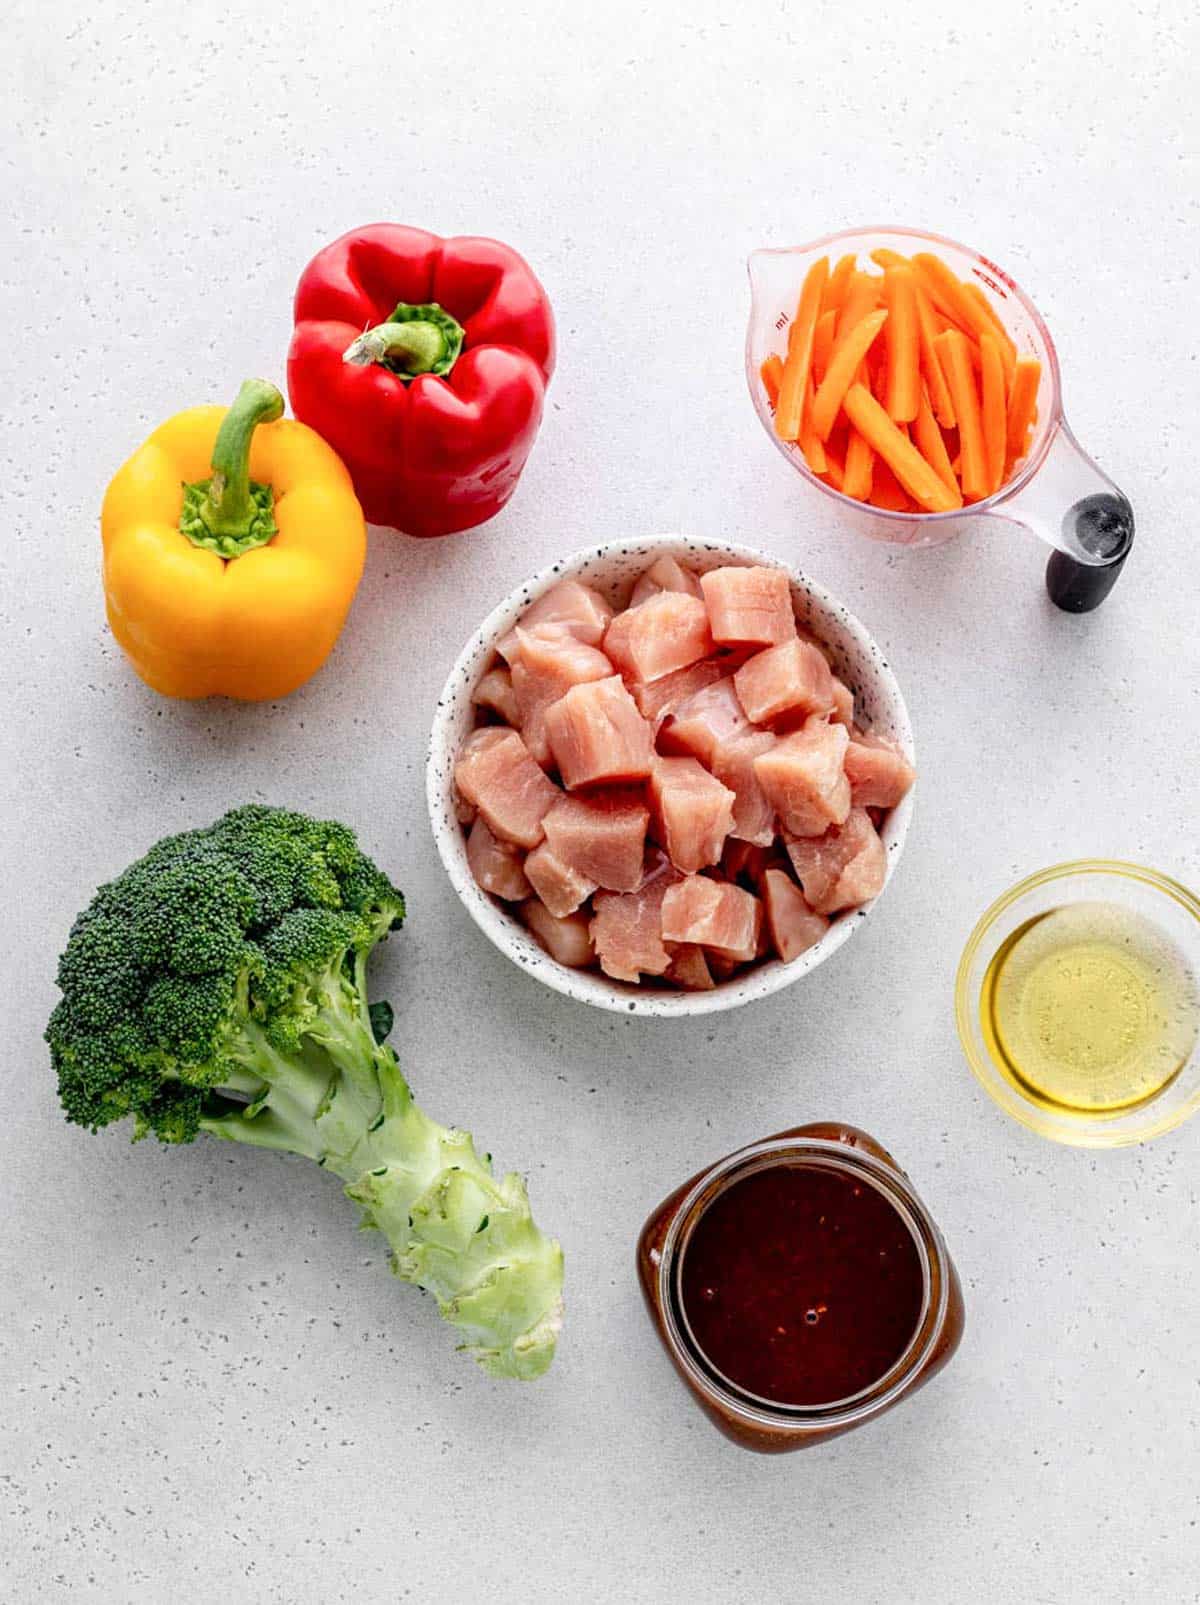 The ingredients for healthy chicken stir fry, including bell peppers, broccoli, chicken, stir fry sauce, sesame oil and baby carrots.